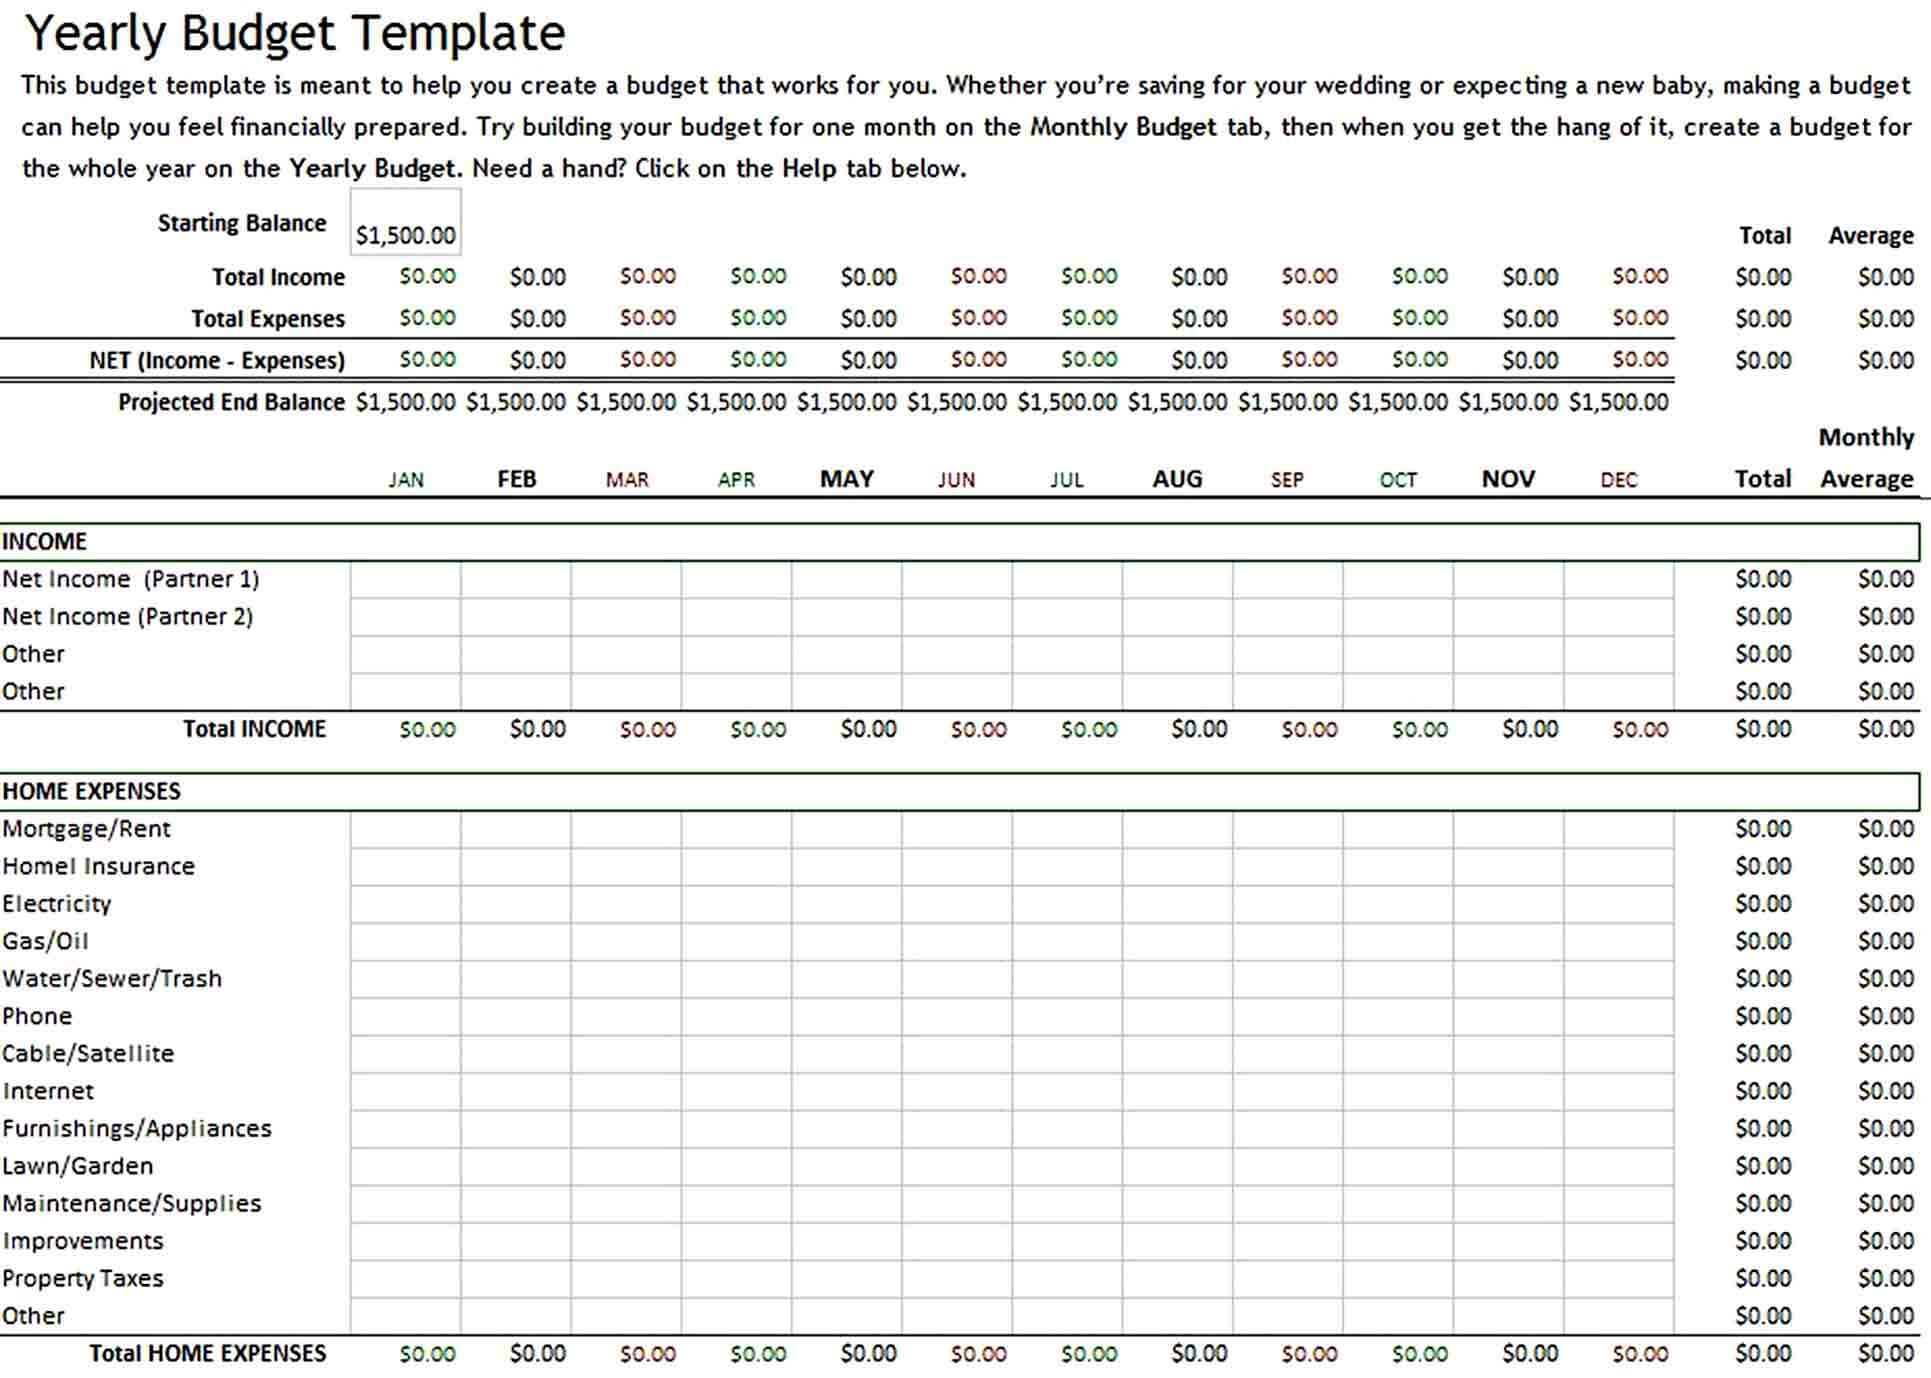 Free Yearly Budget Template Download